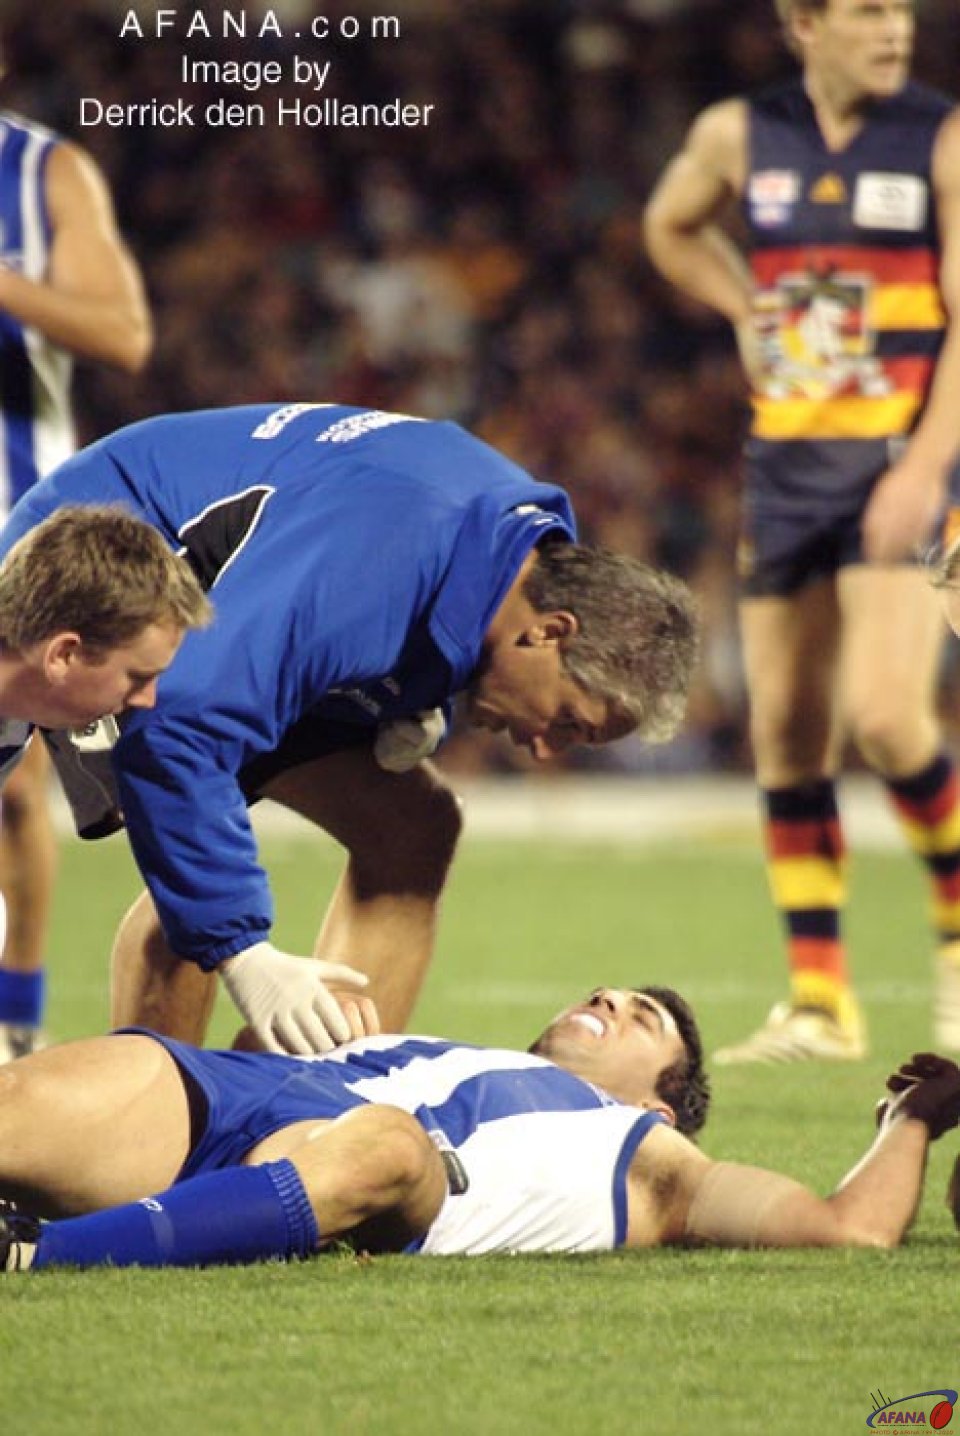 [b]An injured North Melbourne player receives assistance from Kangaroos support staff[/b]